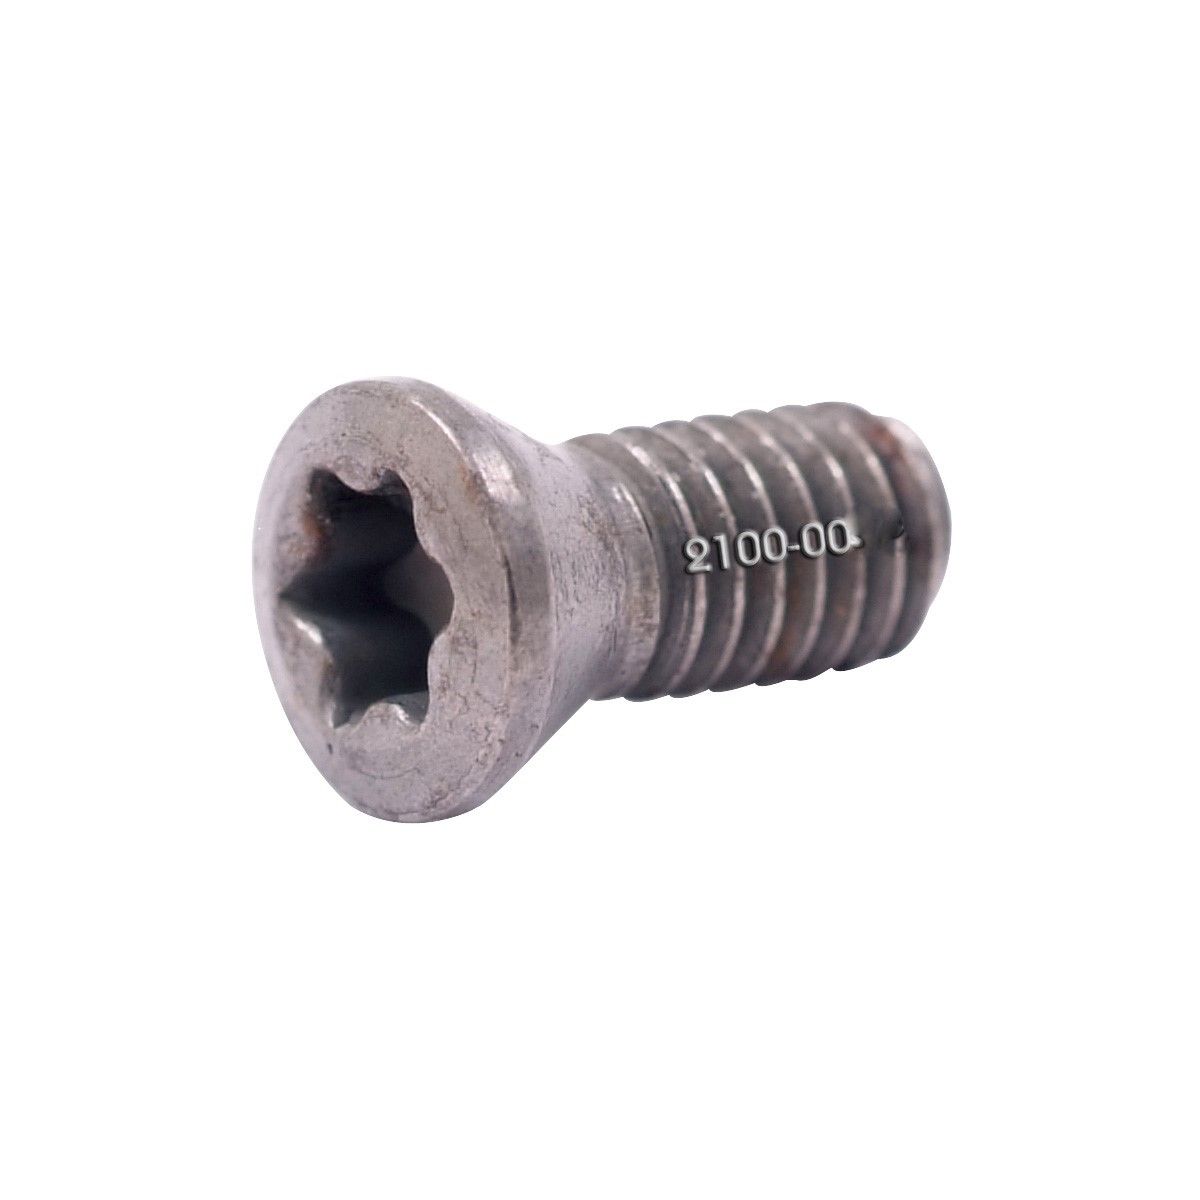 M4 X 10MM OVERALL LENGTH SCREW (2100-0074)